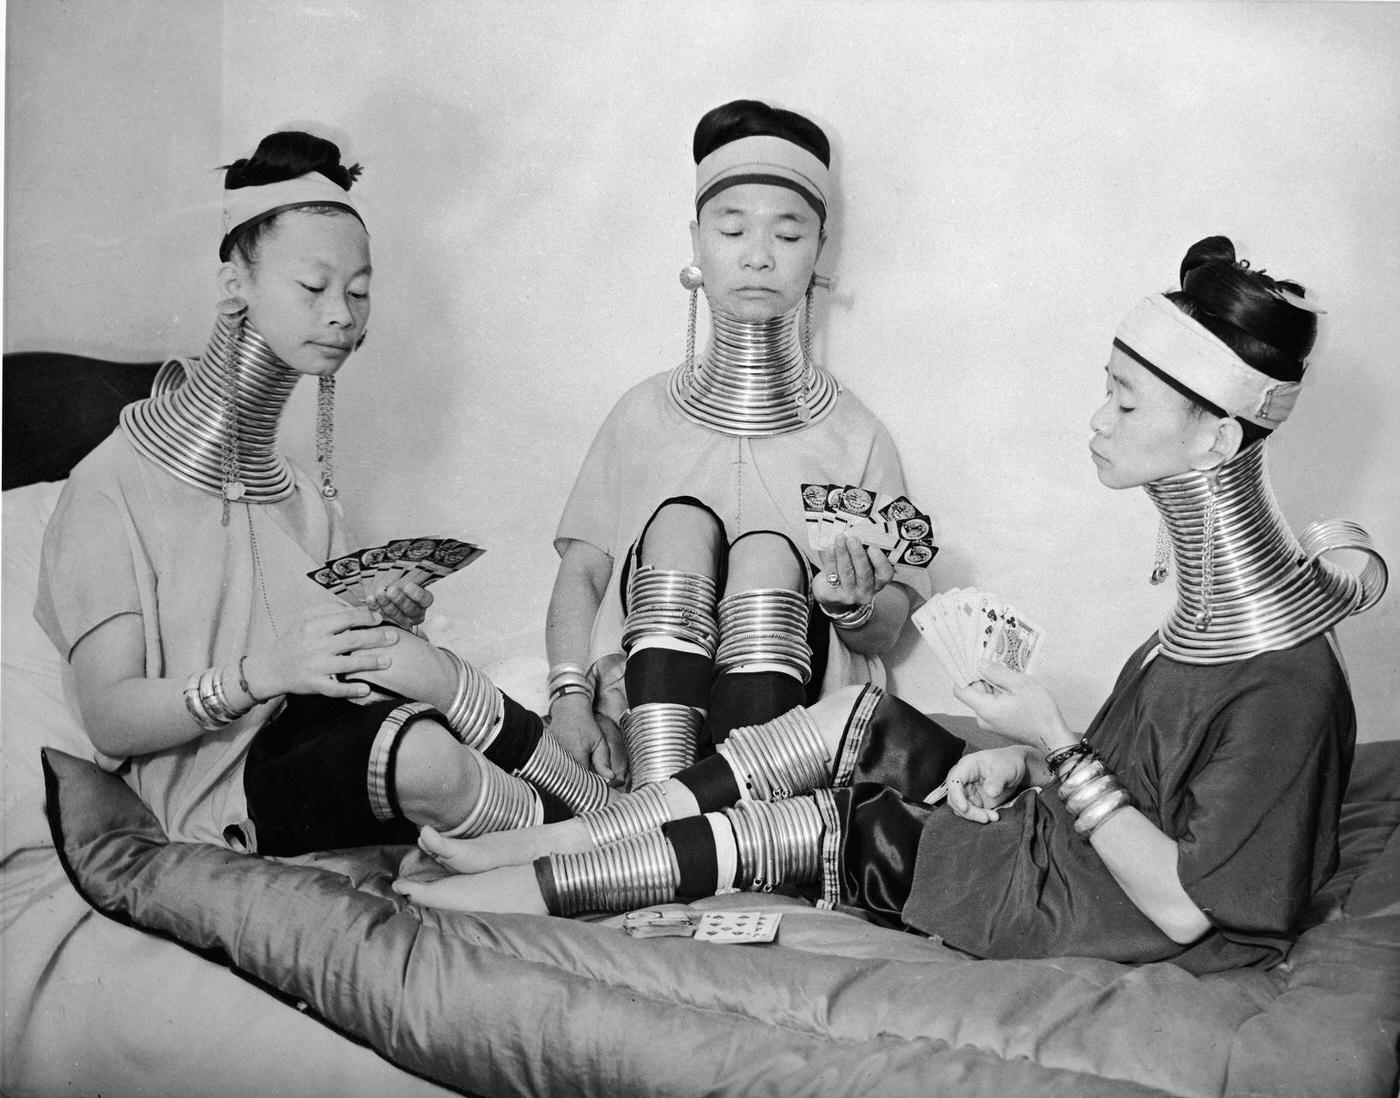 Three Burmese women from a circus playing cards while wearing brass neck and leg rings, London, 1935.